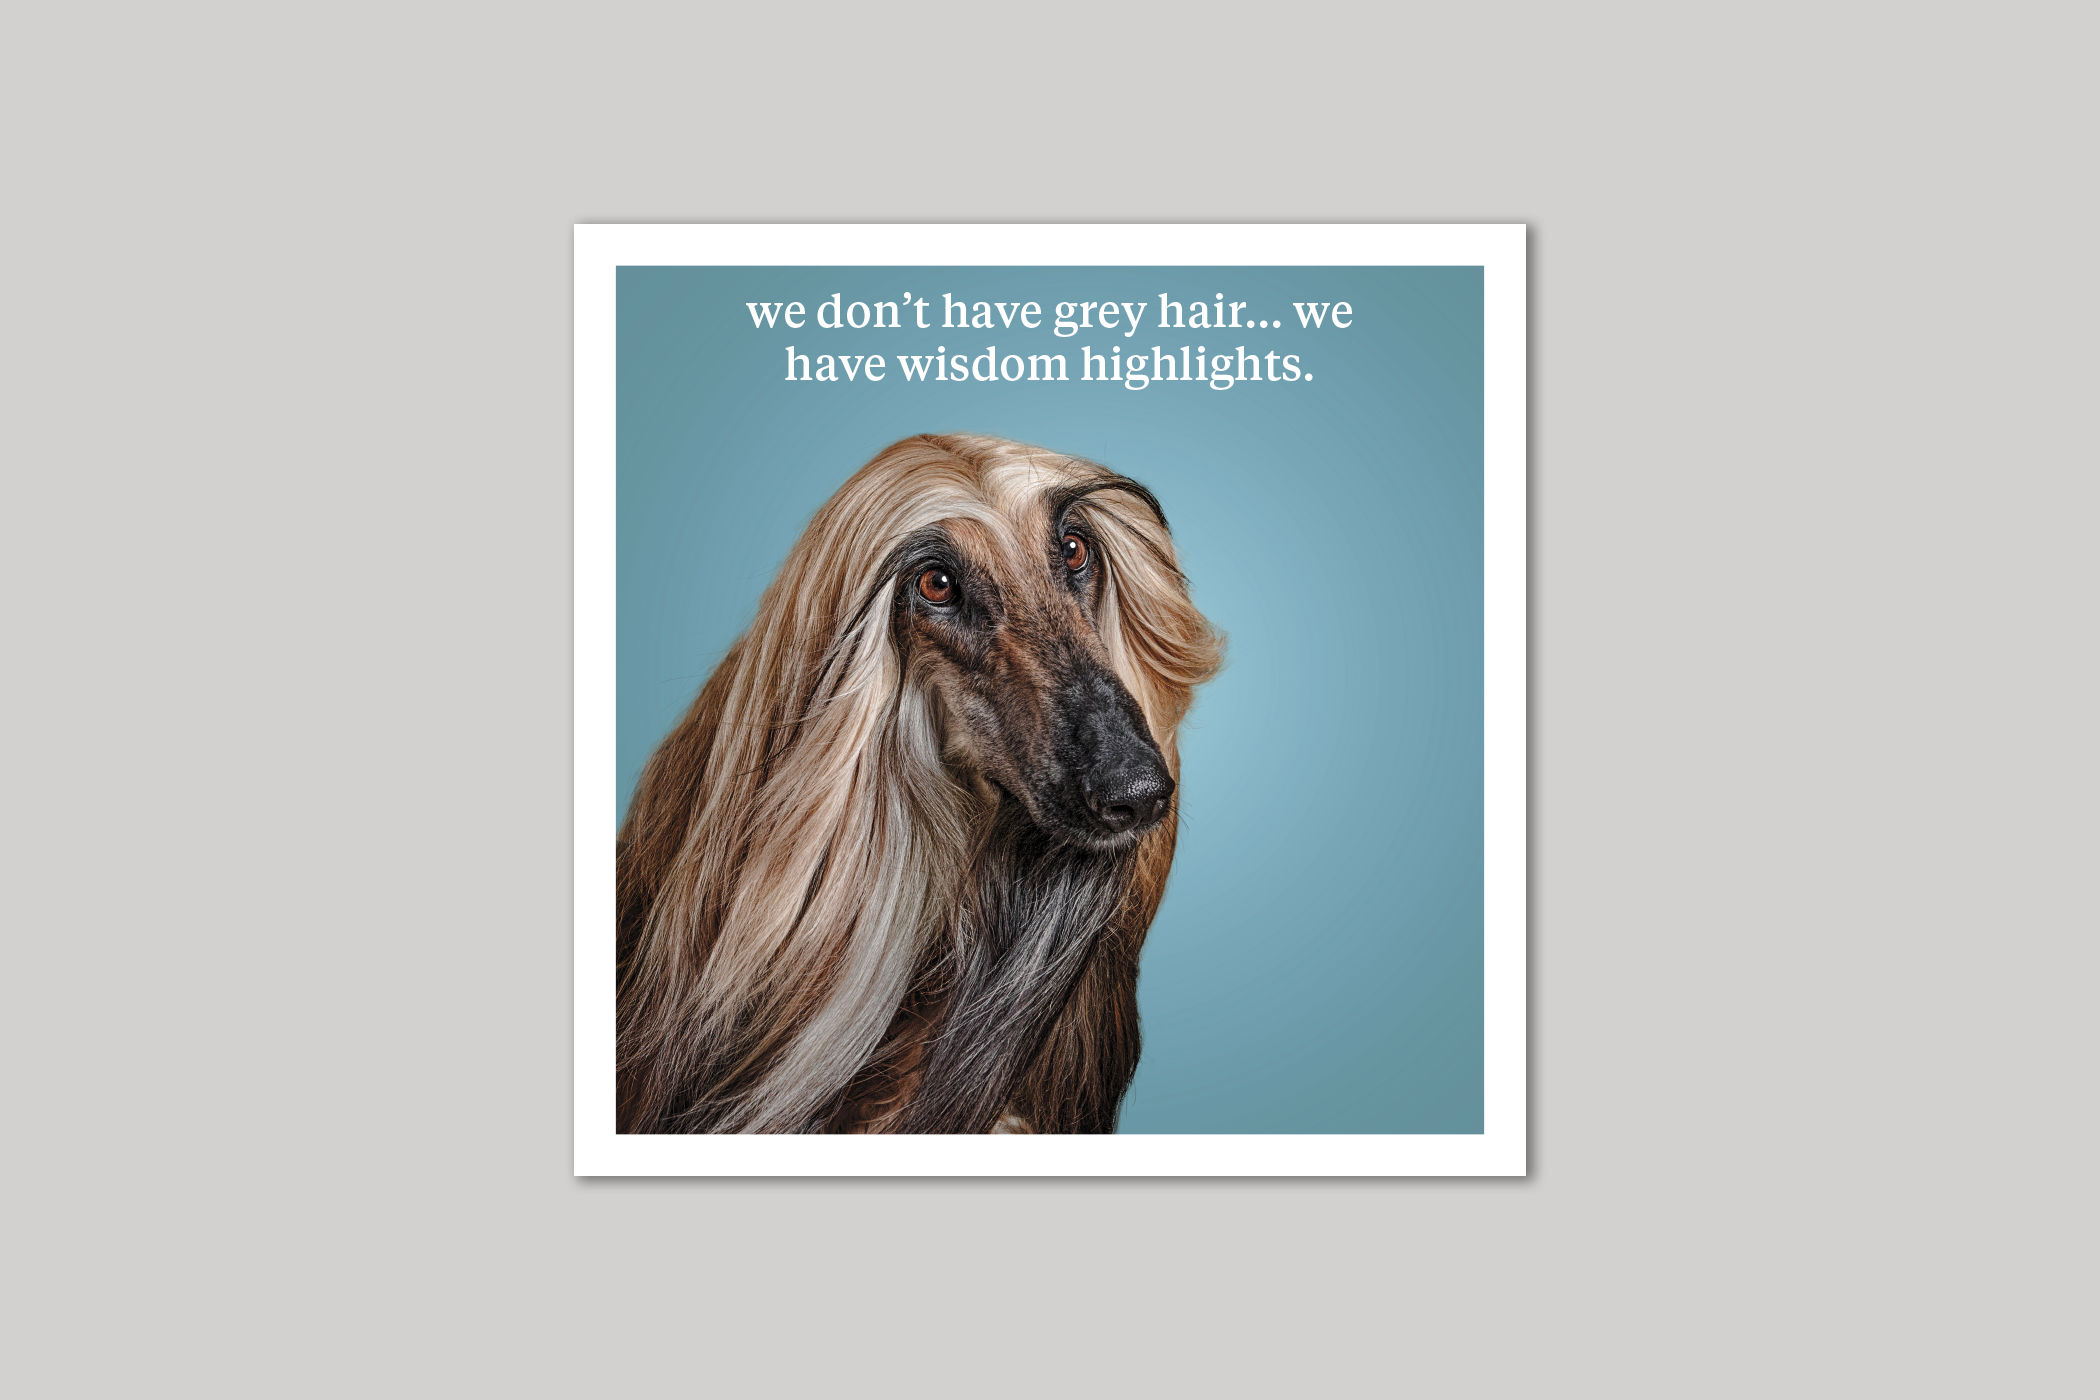 Wisdom Highlights quirky animal portrait from Curious World range of greeting cards by Icon.